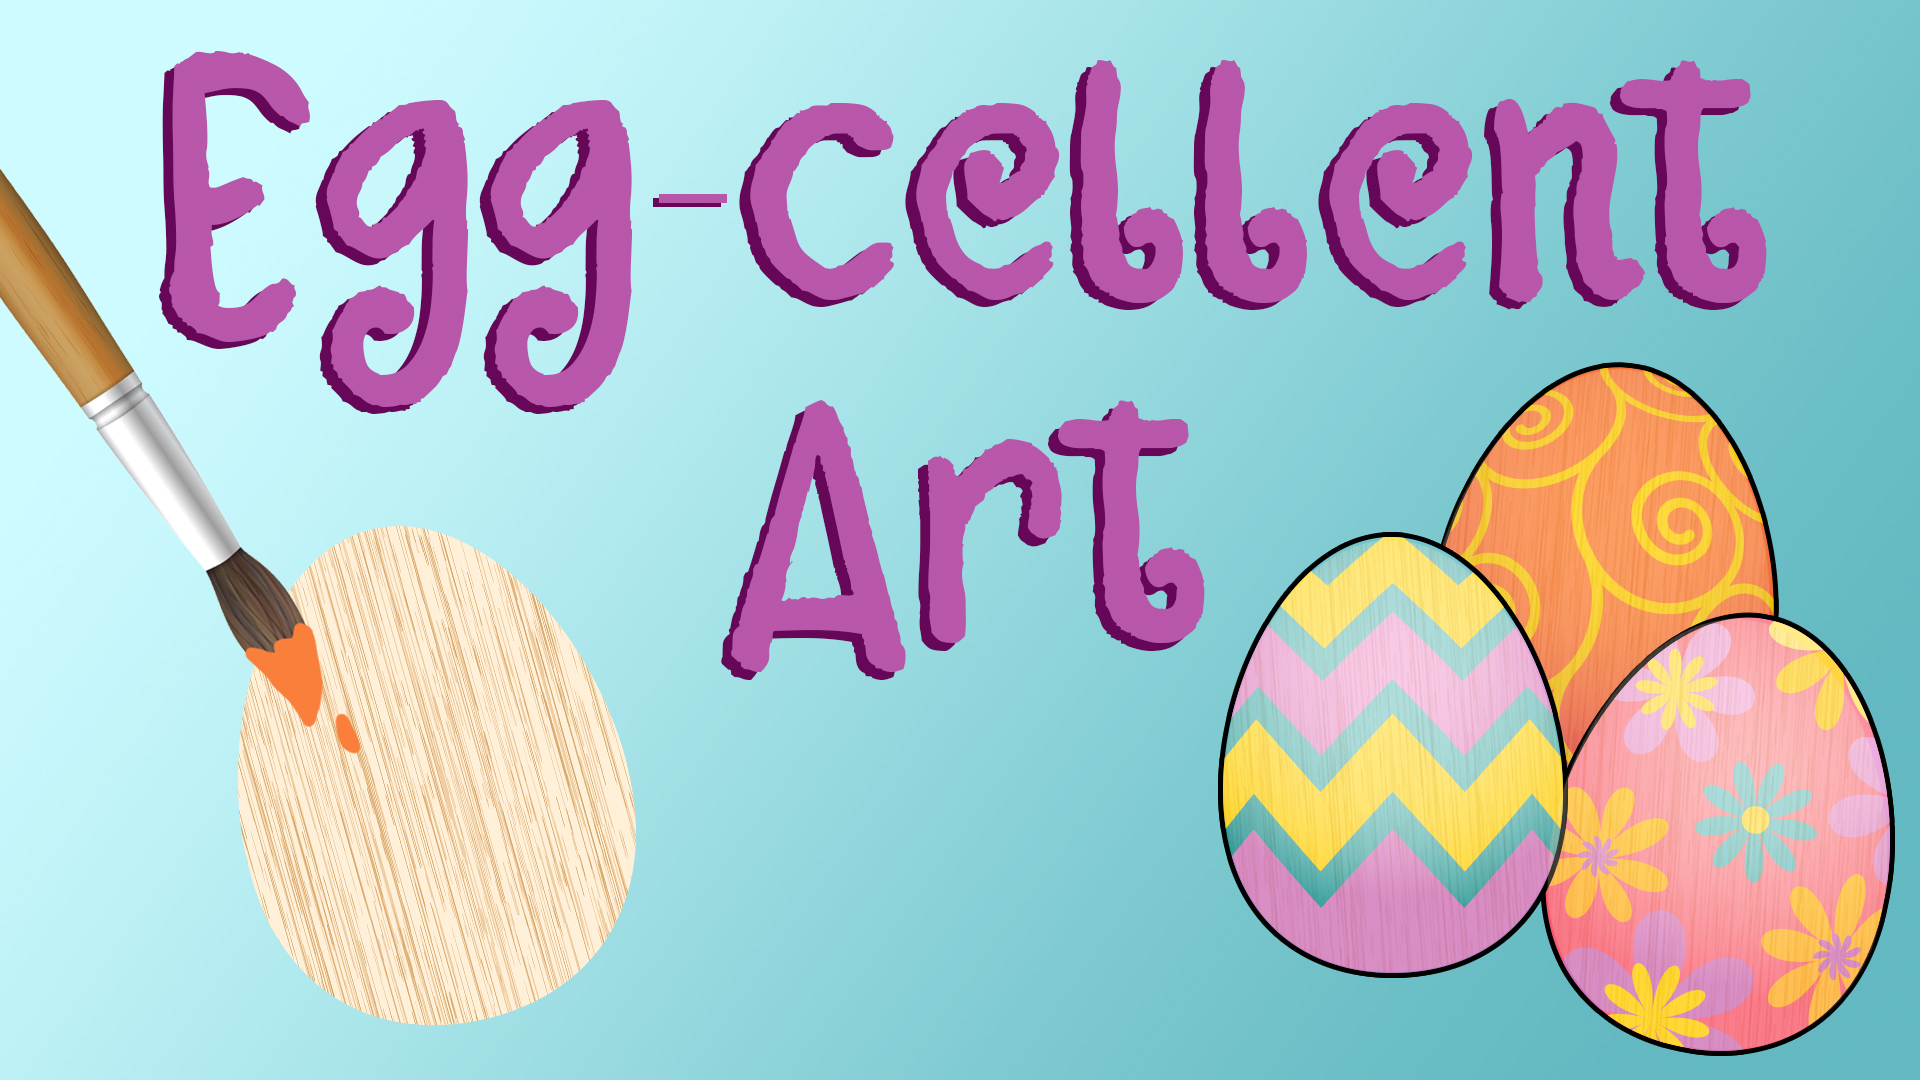 Image reads "Egg-cellent Art" against a gradient blue background. Three painted eggs are to the bottom right of the title. A wooden egg and a paint brush are to the bottom left of the title.